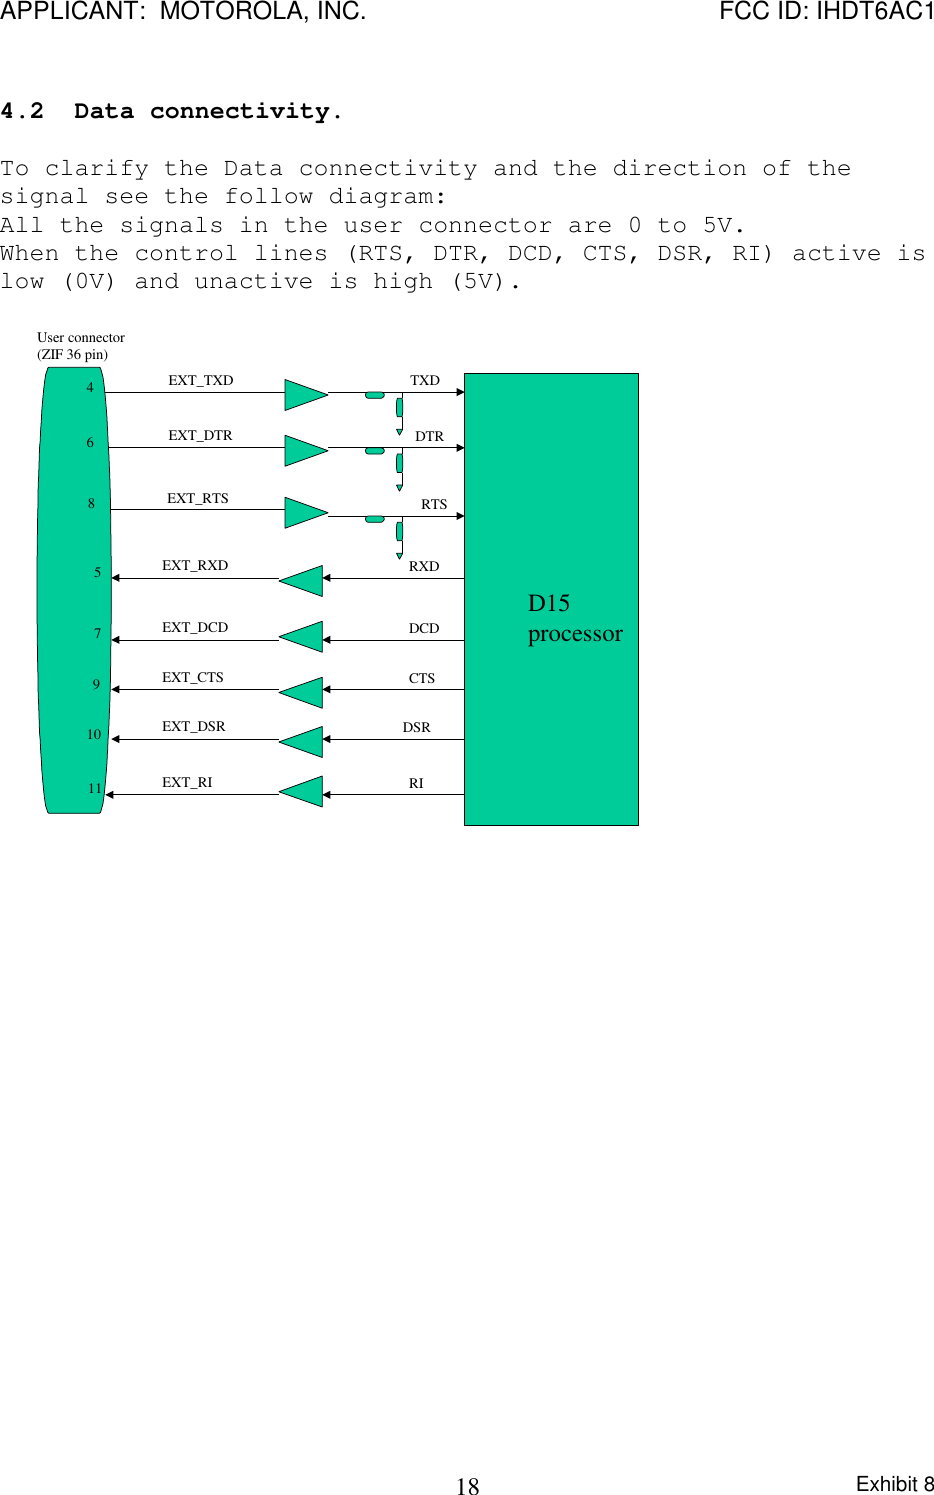 APPLICANT:  MOTOROLA, INC. FCC ID: IHDT6AC1Exhibit 8184.2 Data connectivity.To clarify the Data connectivity and the direction of thesignal see the follow diagram:All the signals in the user connector are 0 to 5V.When the control lines (RTS, DTR, DCD, CTS, DSR, RI) active islow (0V) and unactive is high (5V).4685791011User connector(ZIF 36 pin)EXT_TXDEXT_DTREXT_RTSEXT_RXDEXT_DCDEXT_CTSEXT_DSREXT_RITXDDTRRTSRXDDCDCTSDSRRID15processor